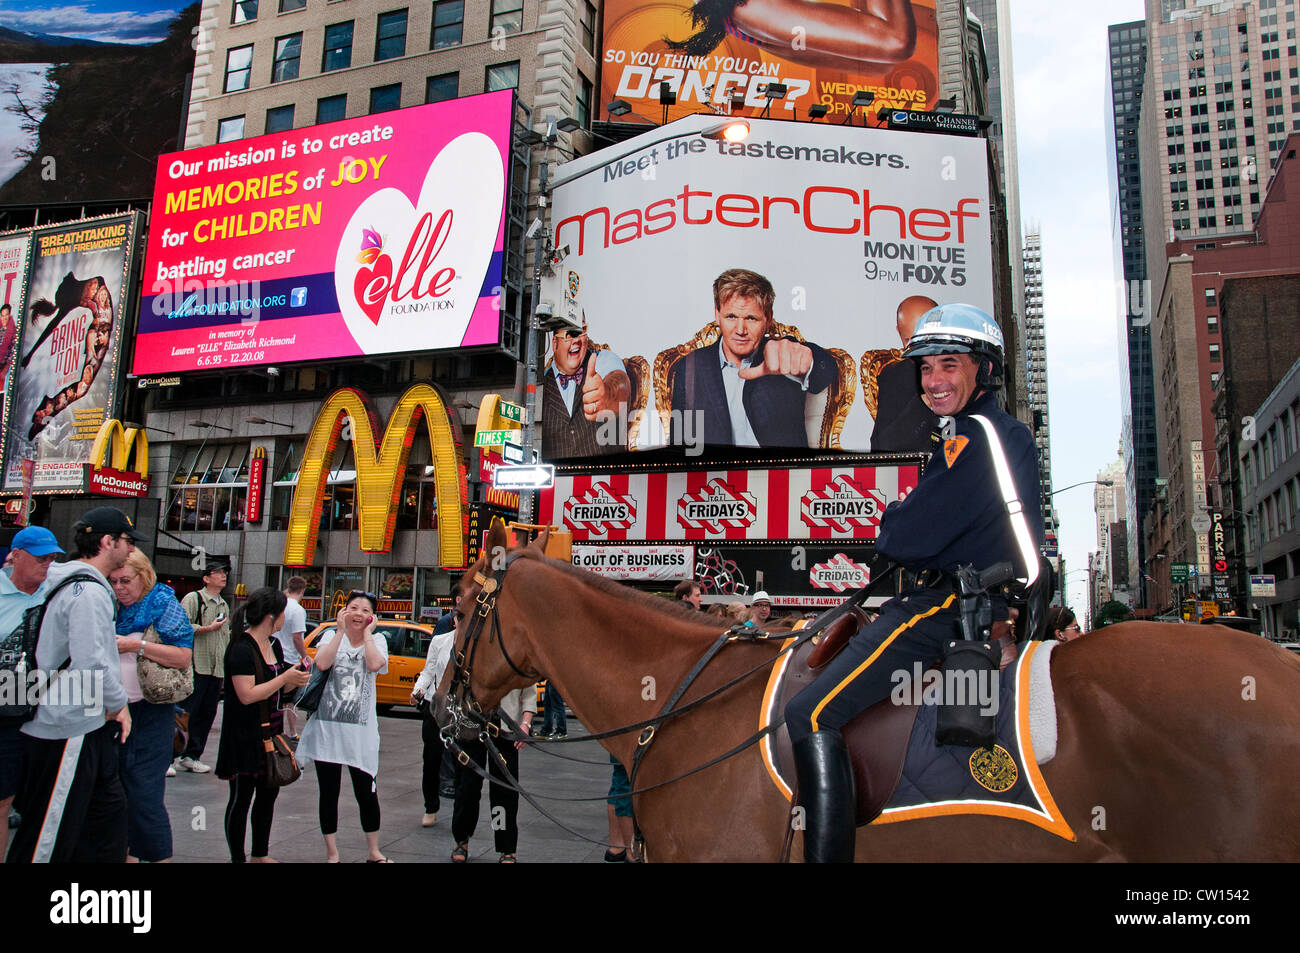 Master Chef Gordon Ramsey Times Square New York United States of America Banque D'Images